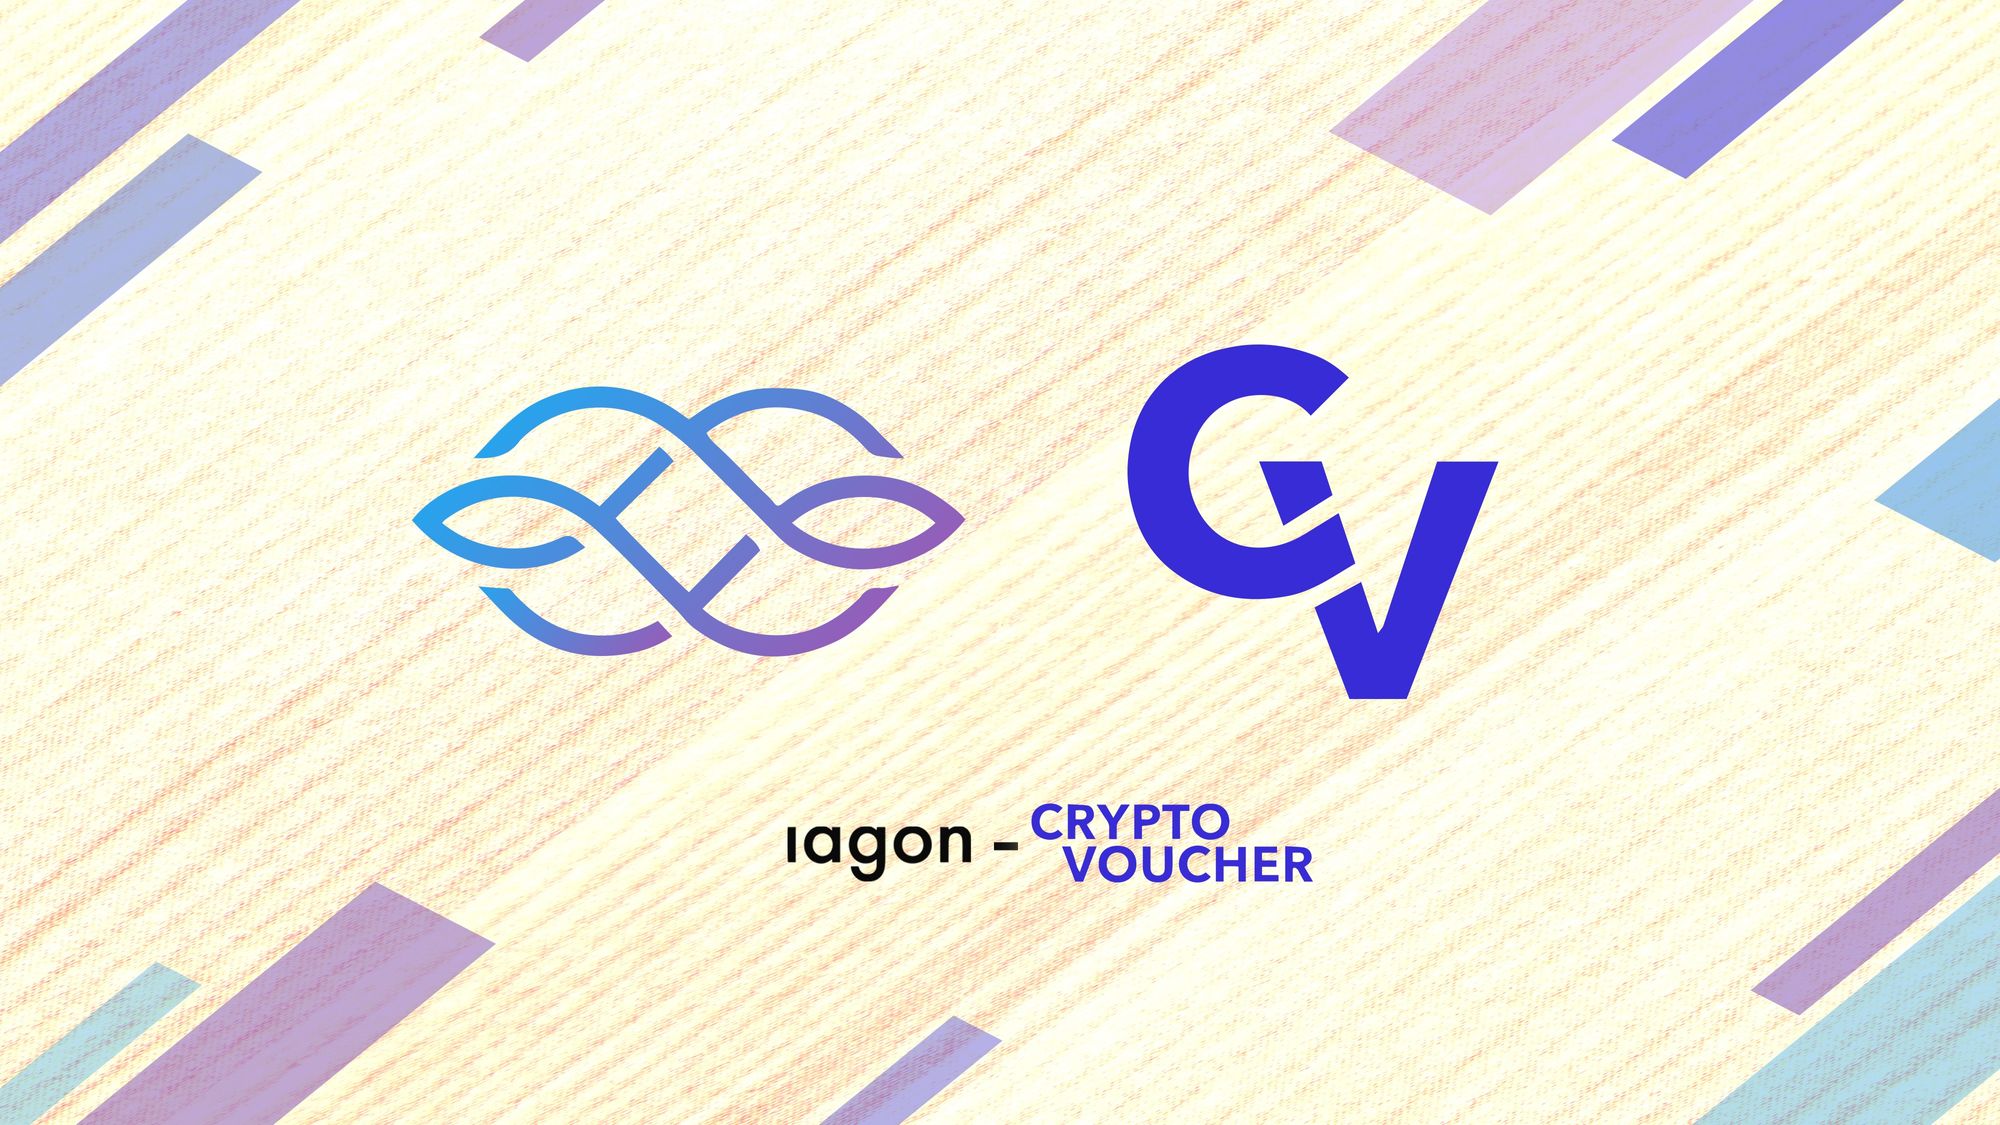 IAGON has Partnered With Crypto Voucher